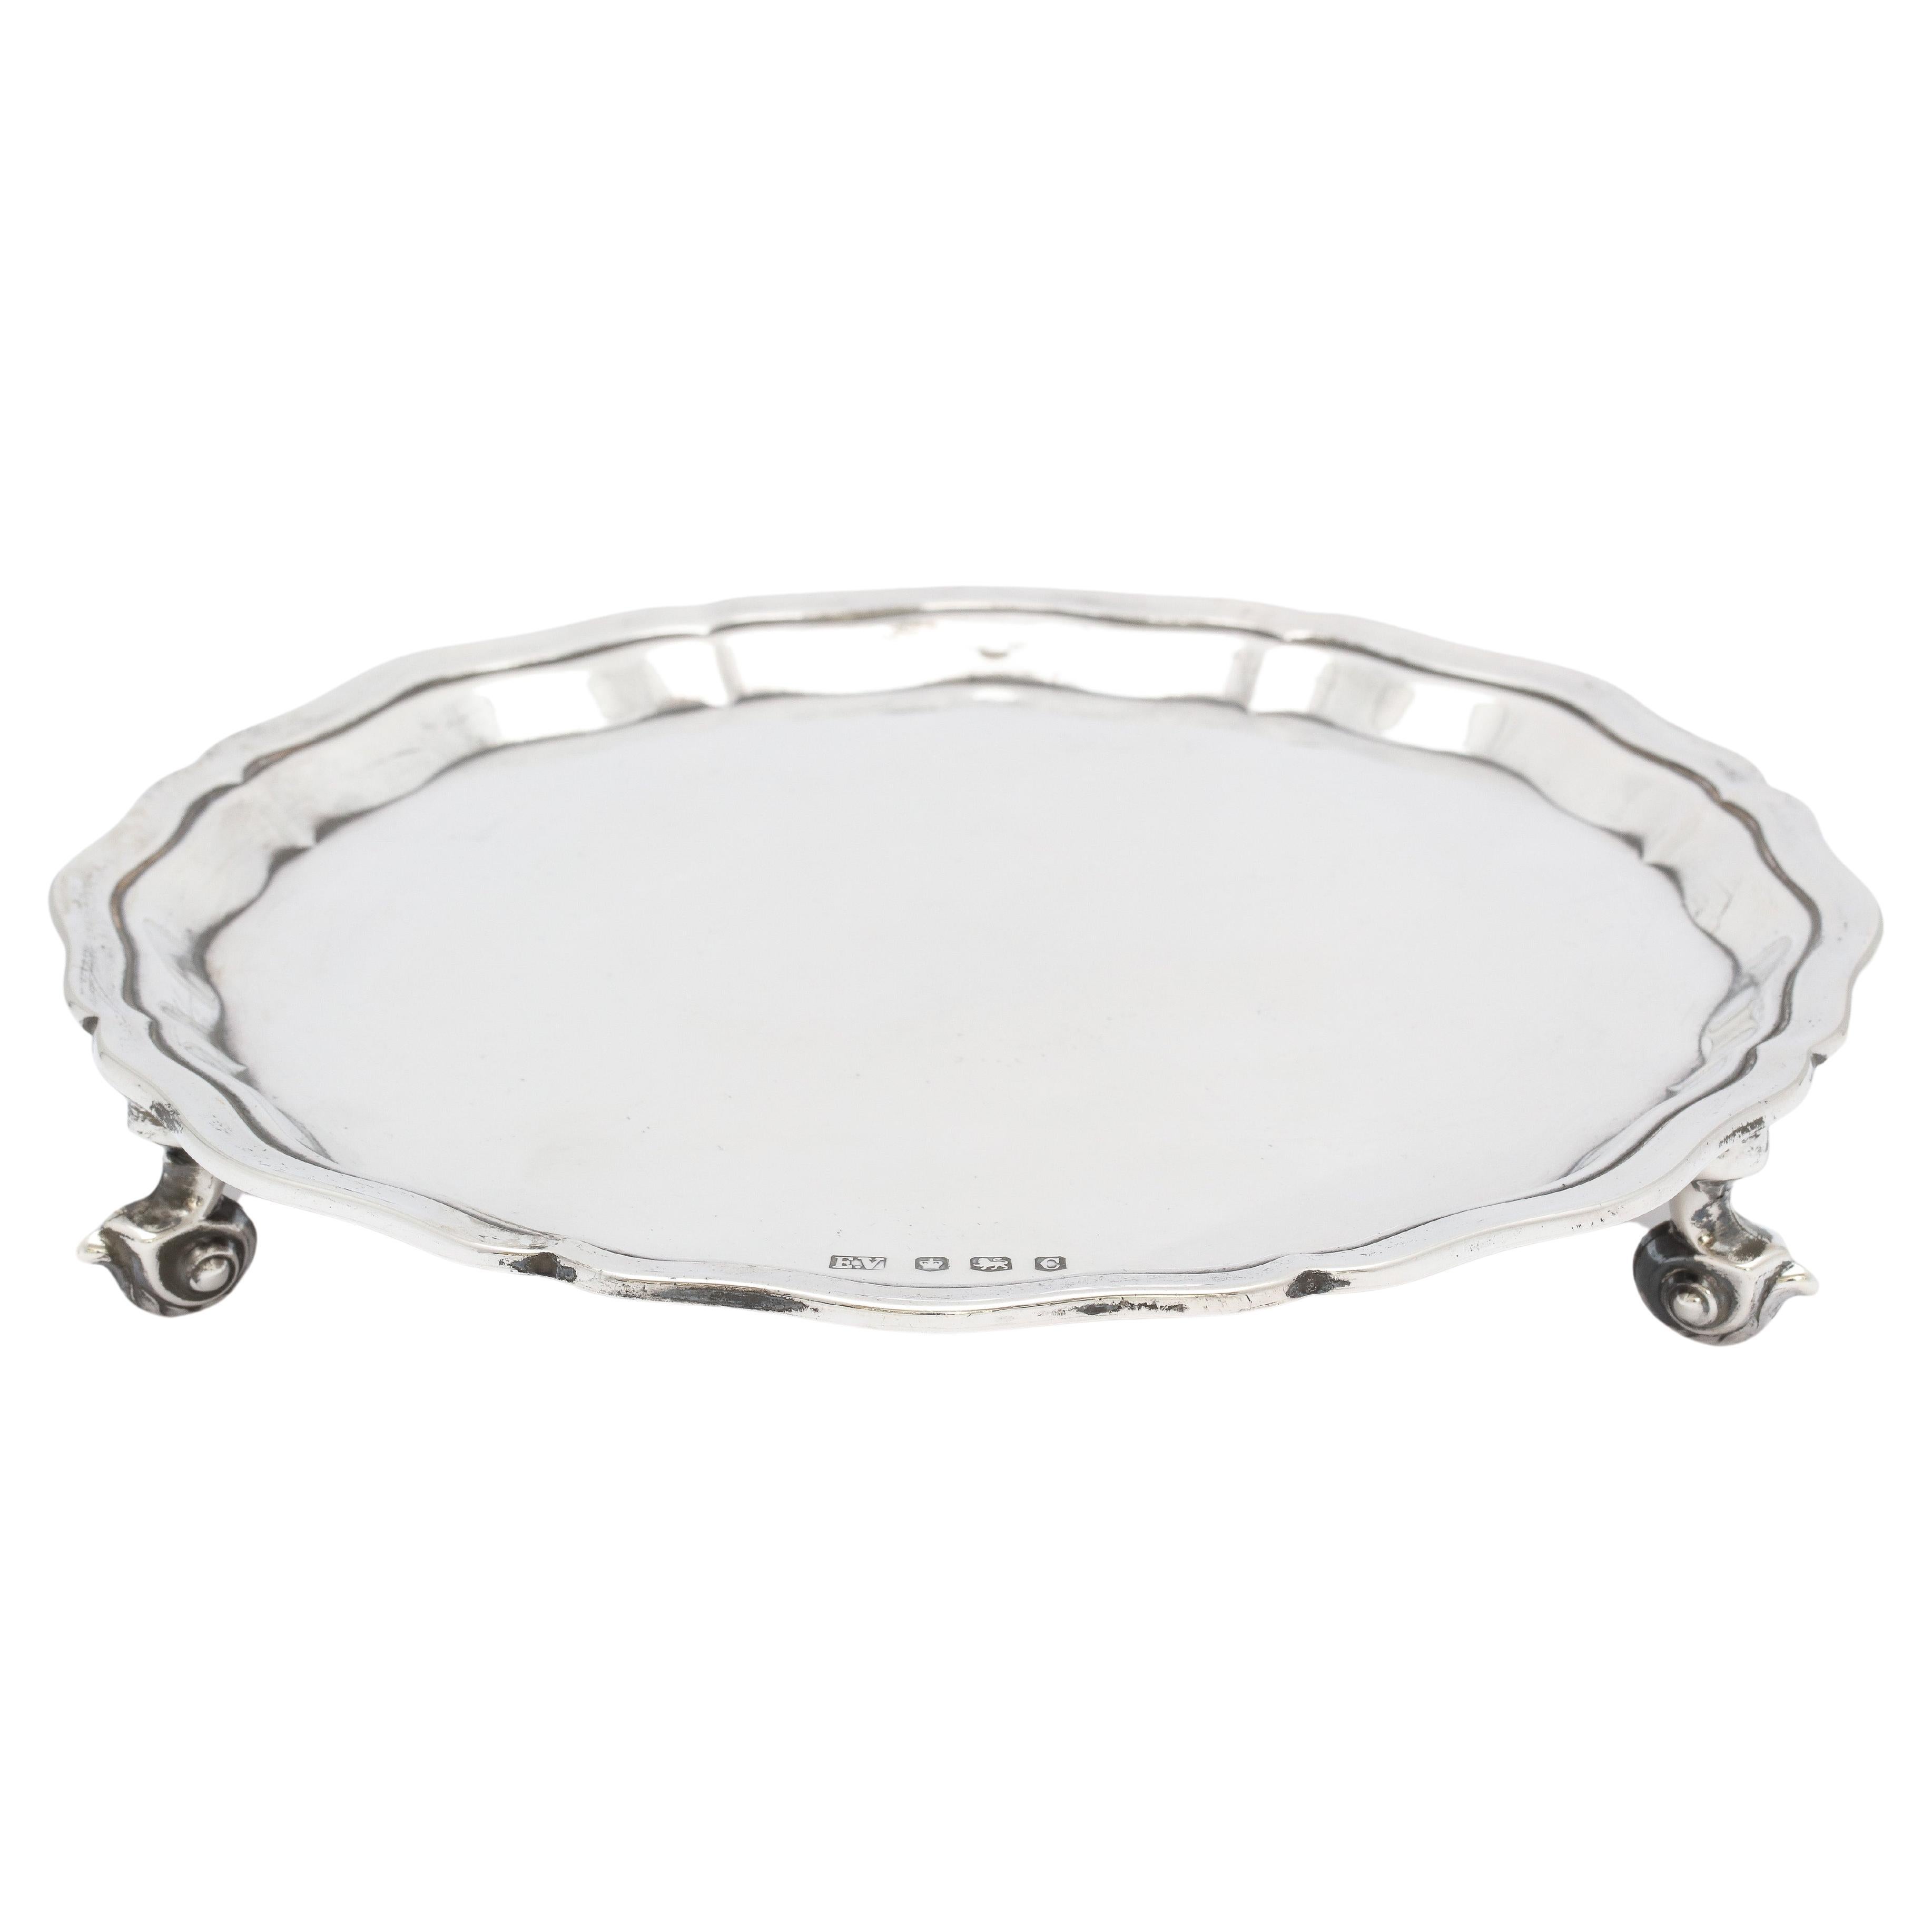 George VI Period Sterling Silver Footed Salver/Tray By Emile Viner